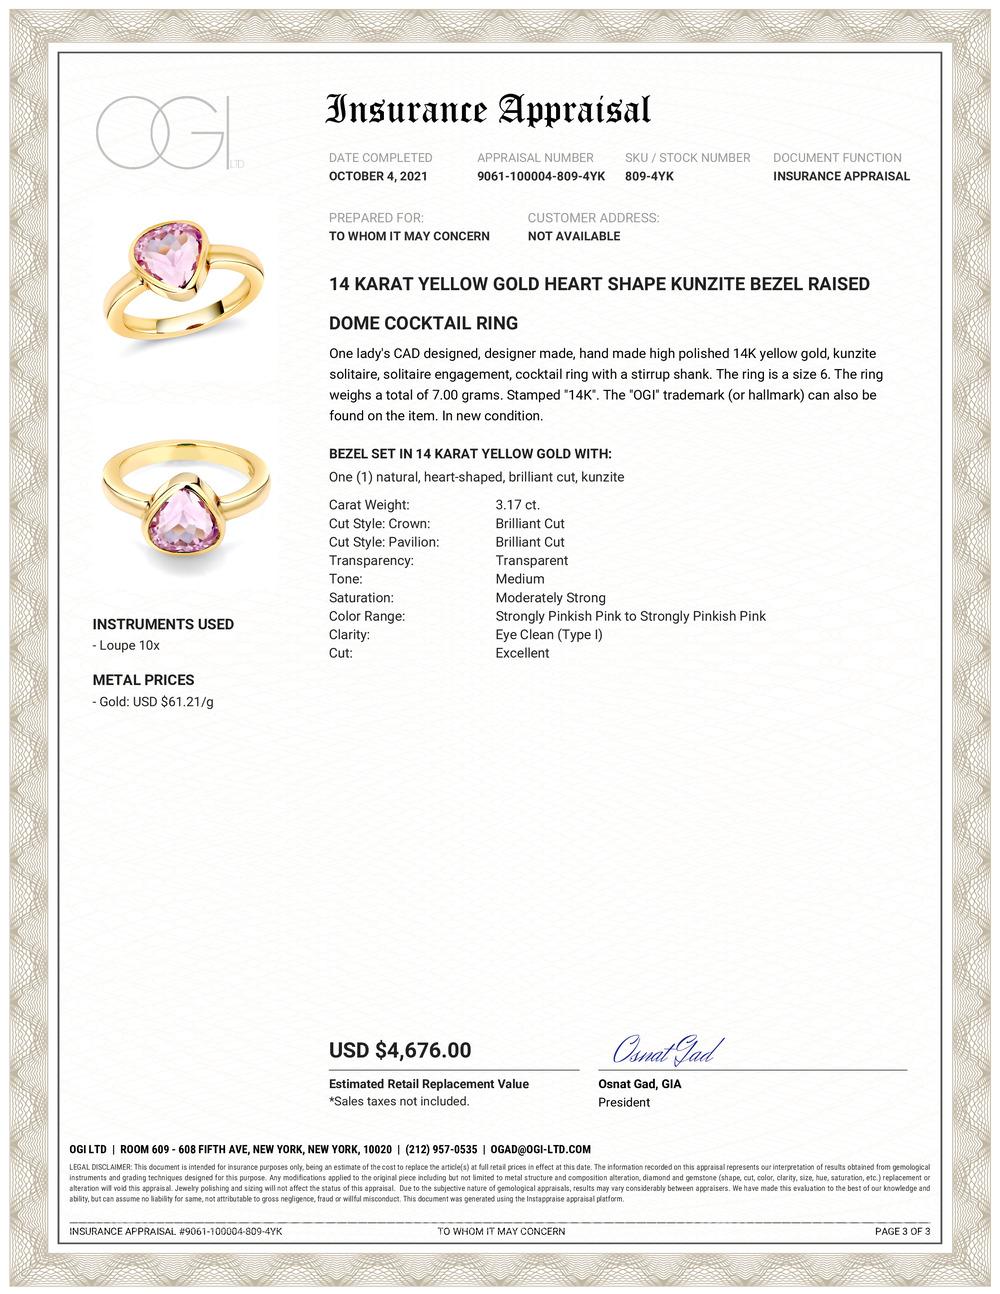 Fourteen karats yellow gold raised bezel dome cocktail ring
Pink and brilliant heart-shaped sweet pink  Kunzite weighing 3.17 carats                                                               
Ring size 6 In Stock
The ring can be slightly resized